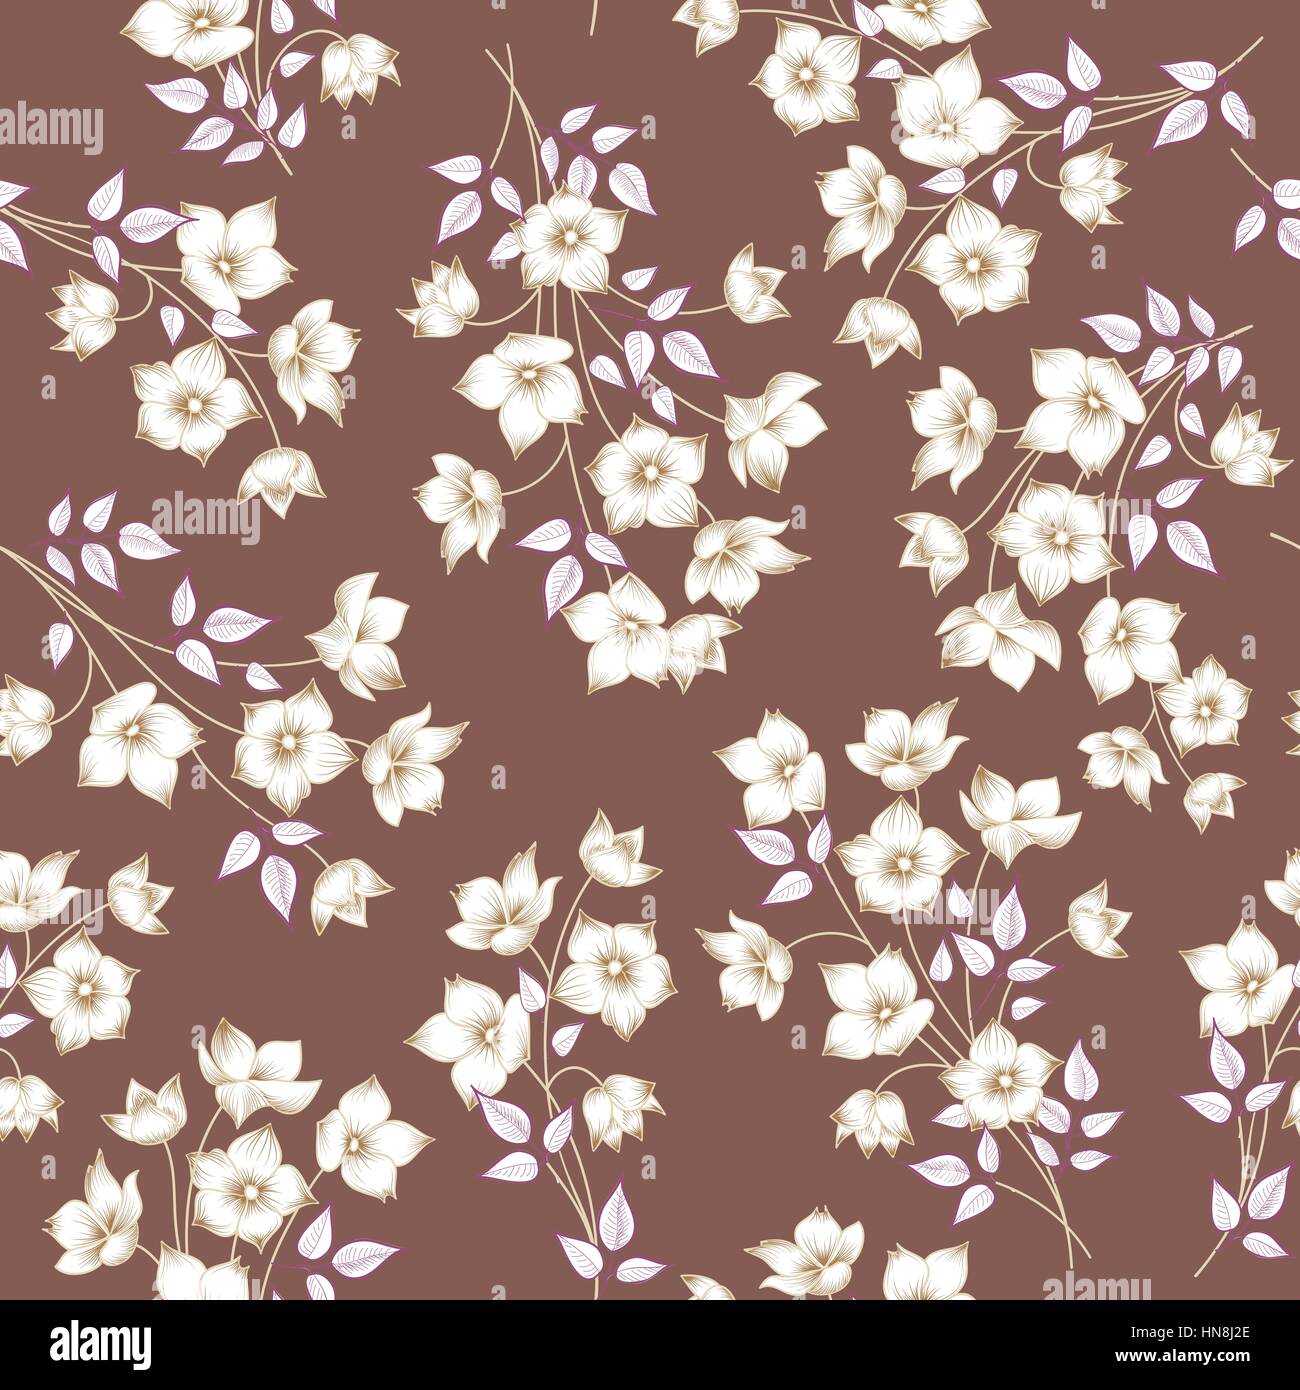 Floral seamless pattern. Astract flower background. Floral seamless texture with flowers. Stock Vector